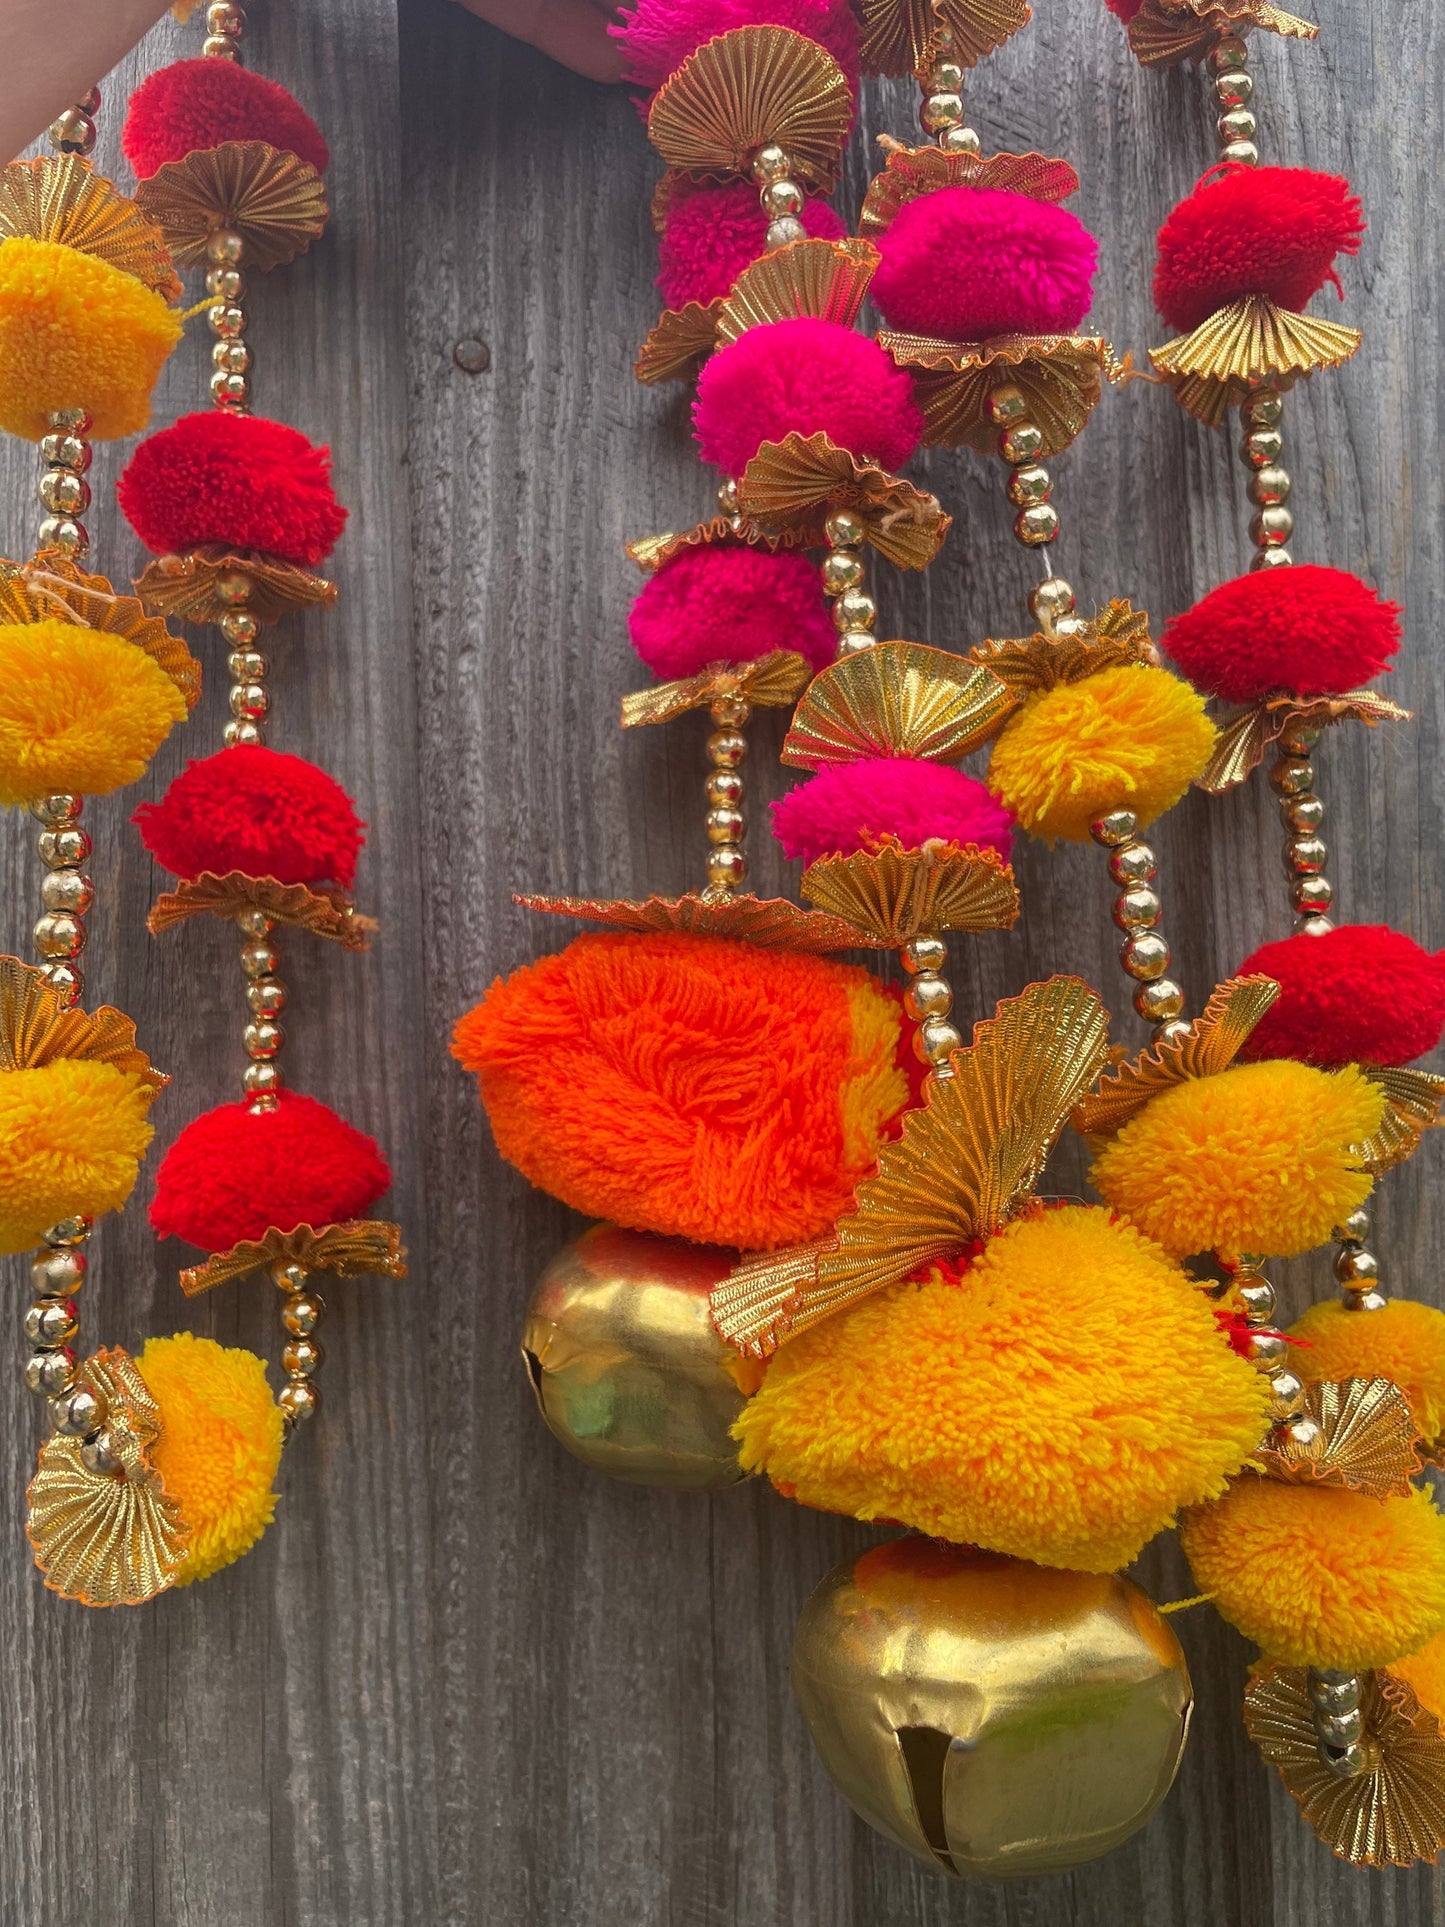 Pair of PomPom Ringing Cowbell Hanging Strings for Diwali Decor Garden Party Decoration Outdoor Backdrops Event Weddings Home Decor New Home